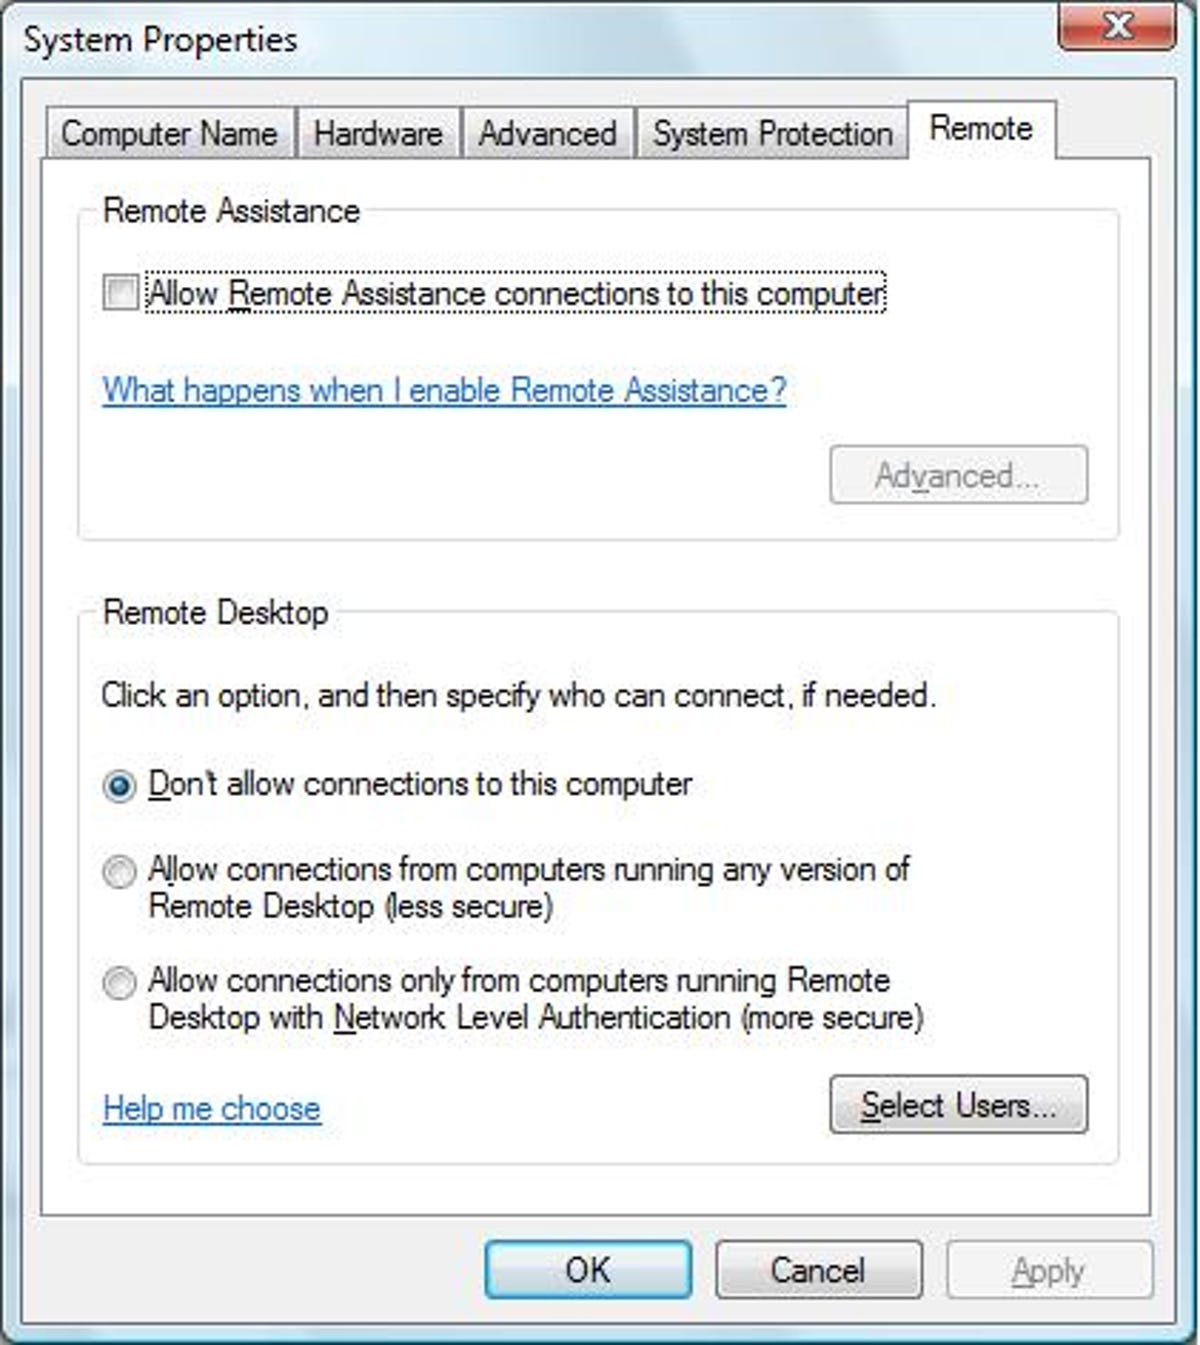 The Remote Access settings in Windows' System Properties dialog box